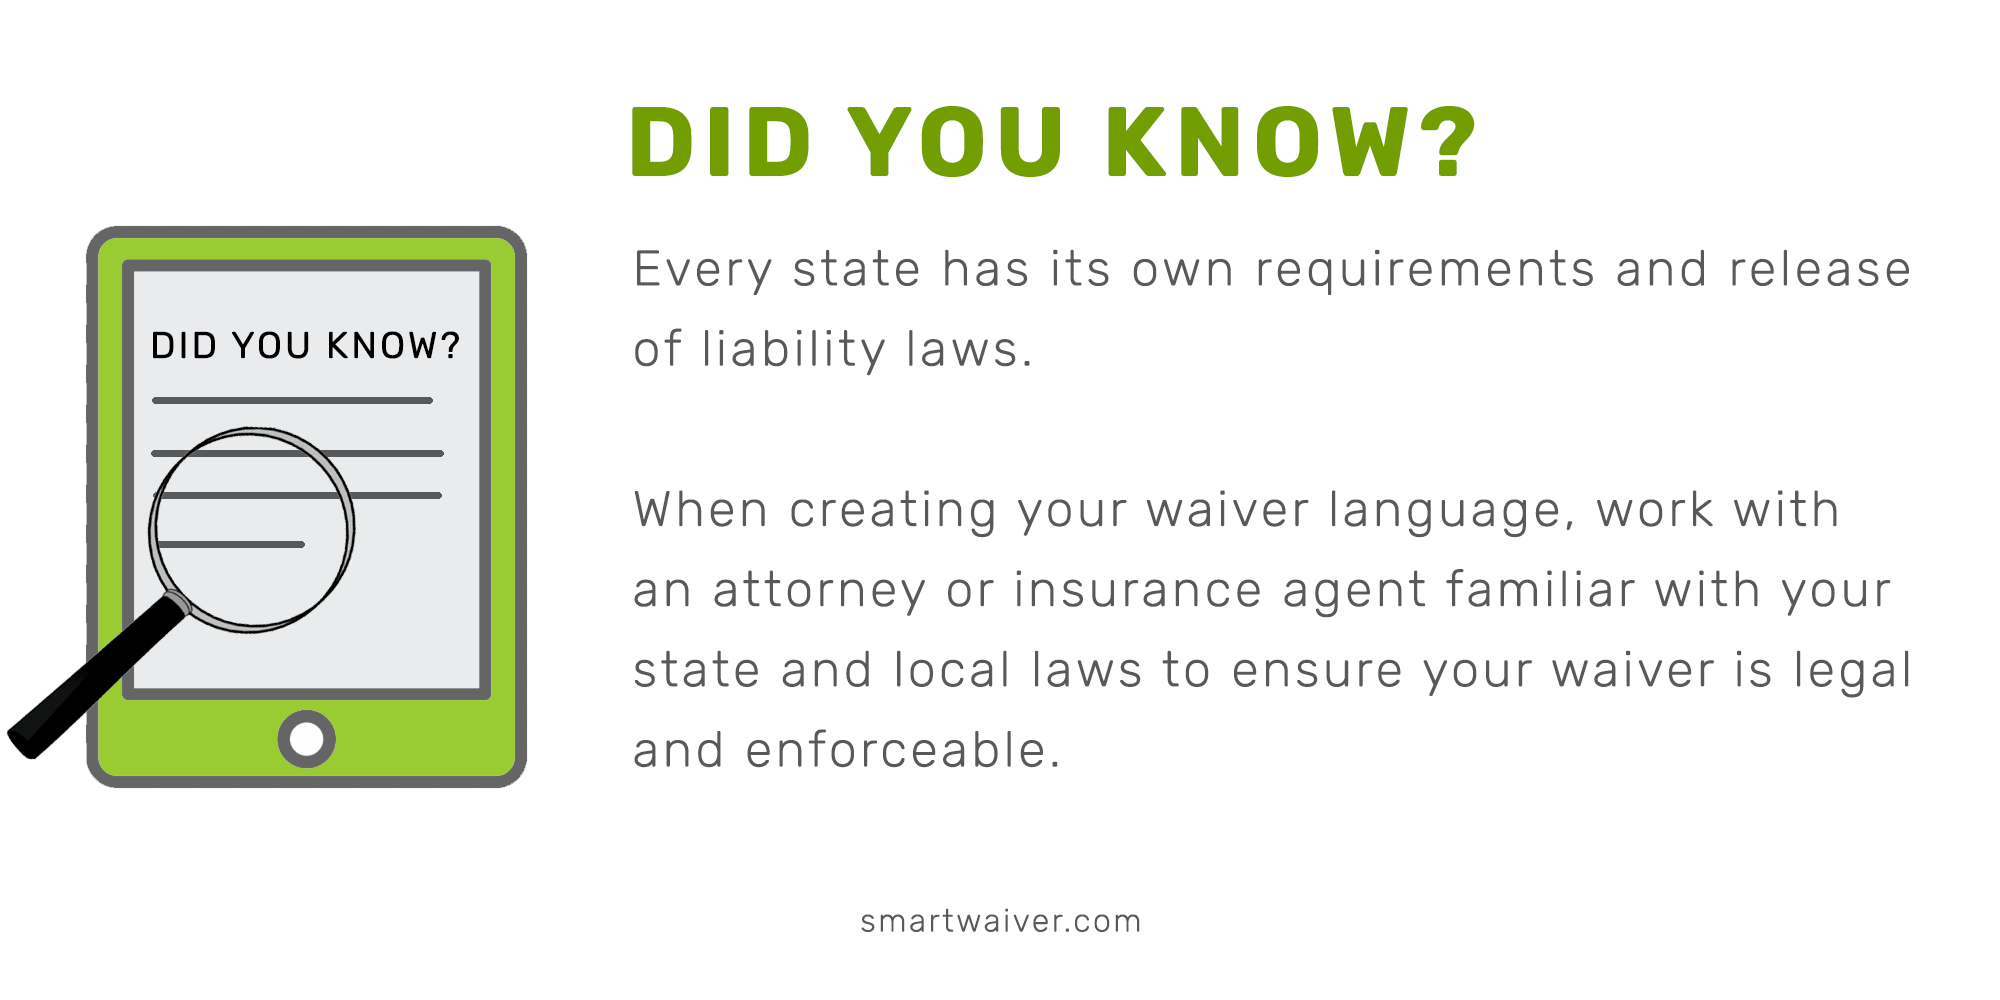 Because every state has its own laws regarding waivers, it’s key to get help from a lawyer when creating your digital camp waiver.